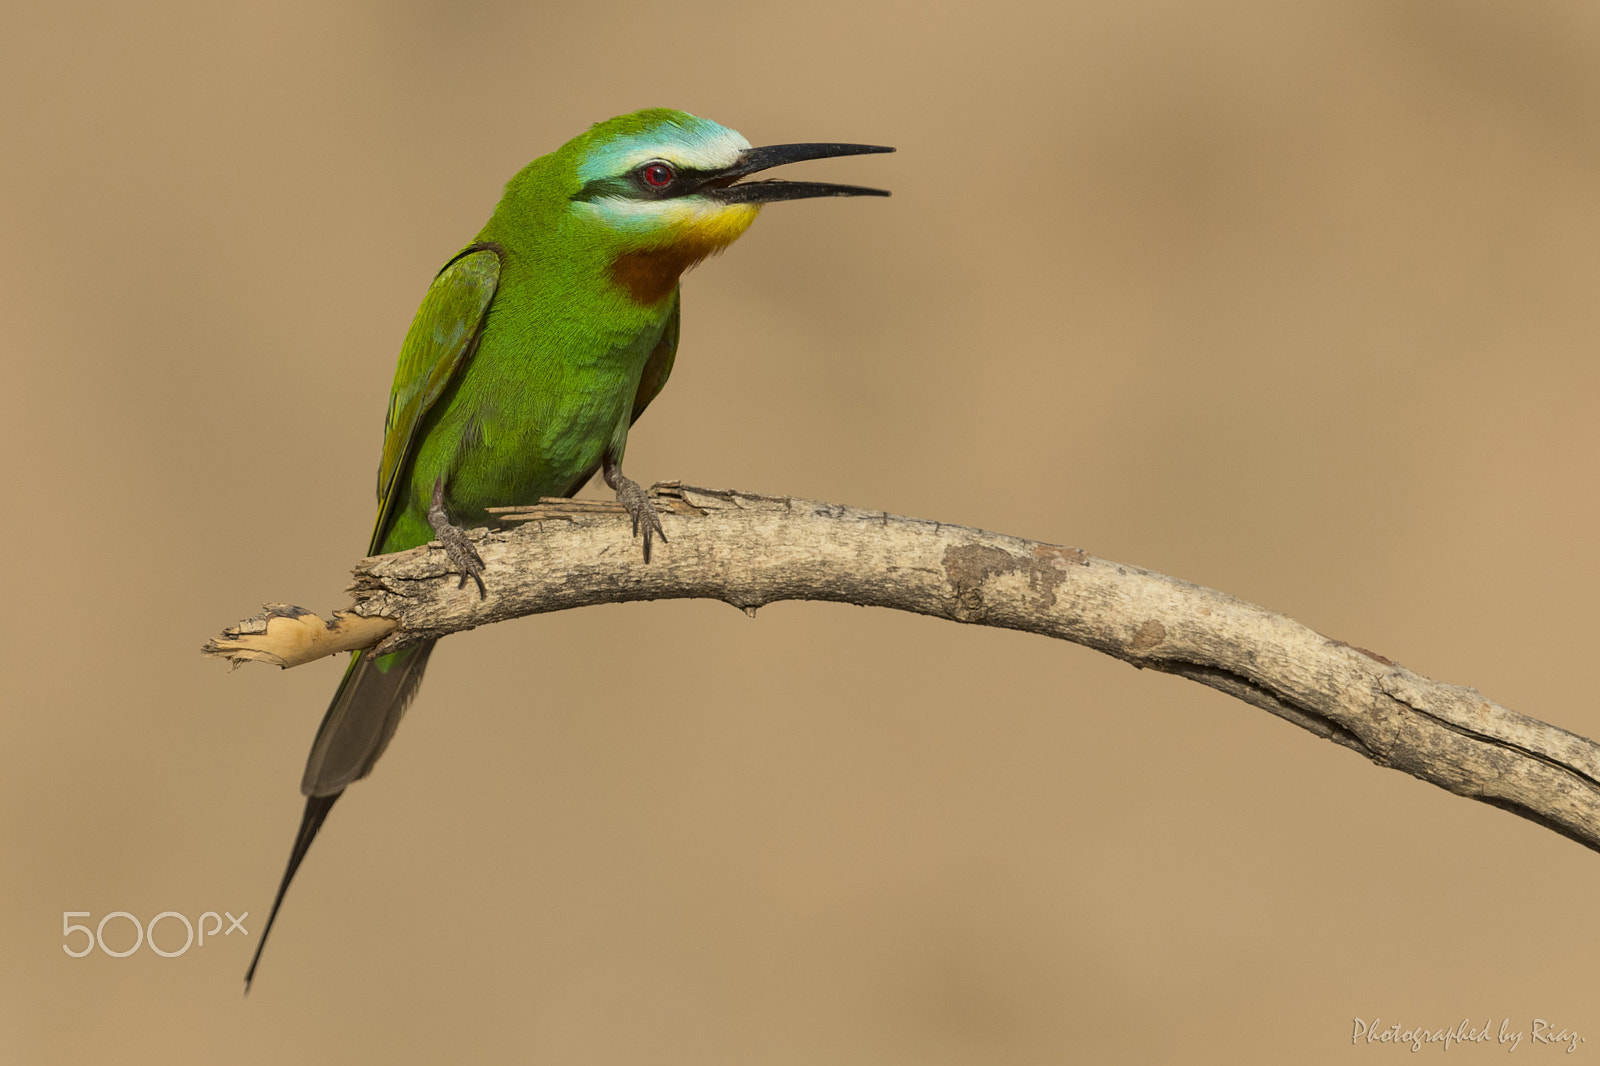 Nikon D5 sample photo. Wonders of nature: blue-cheeked bee-eater photography